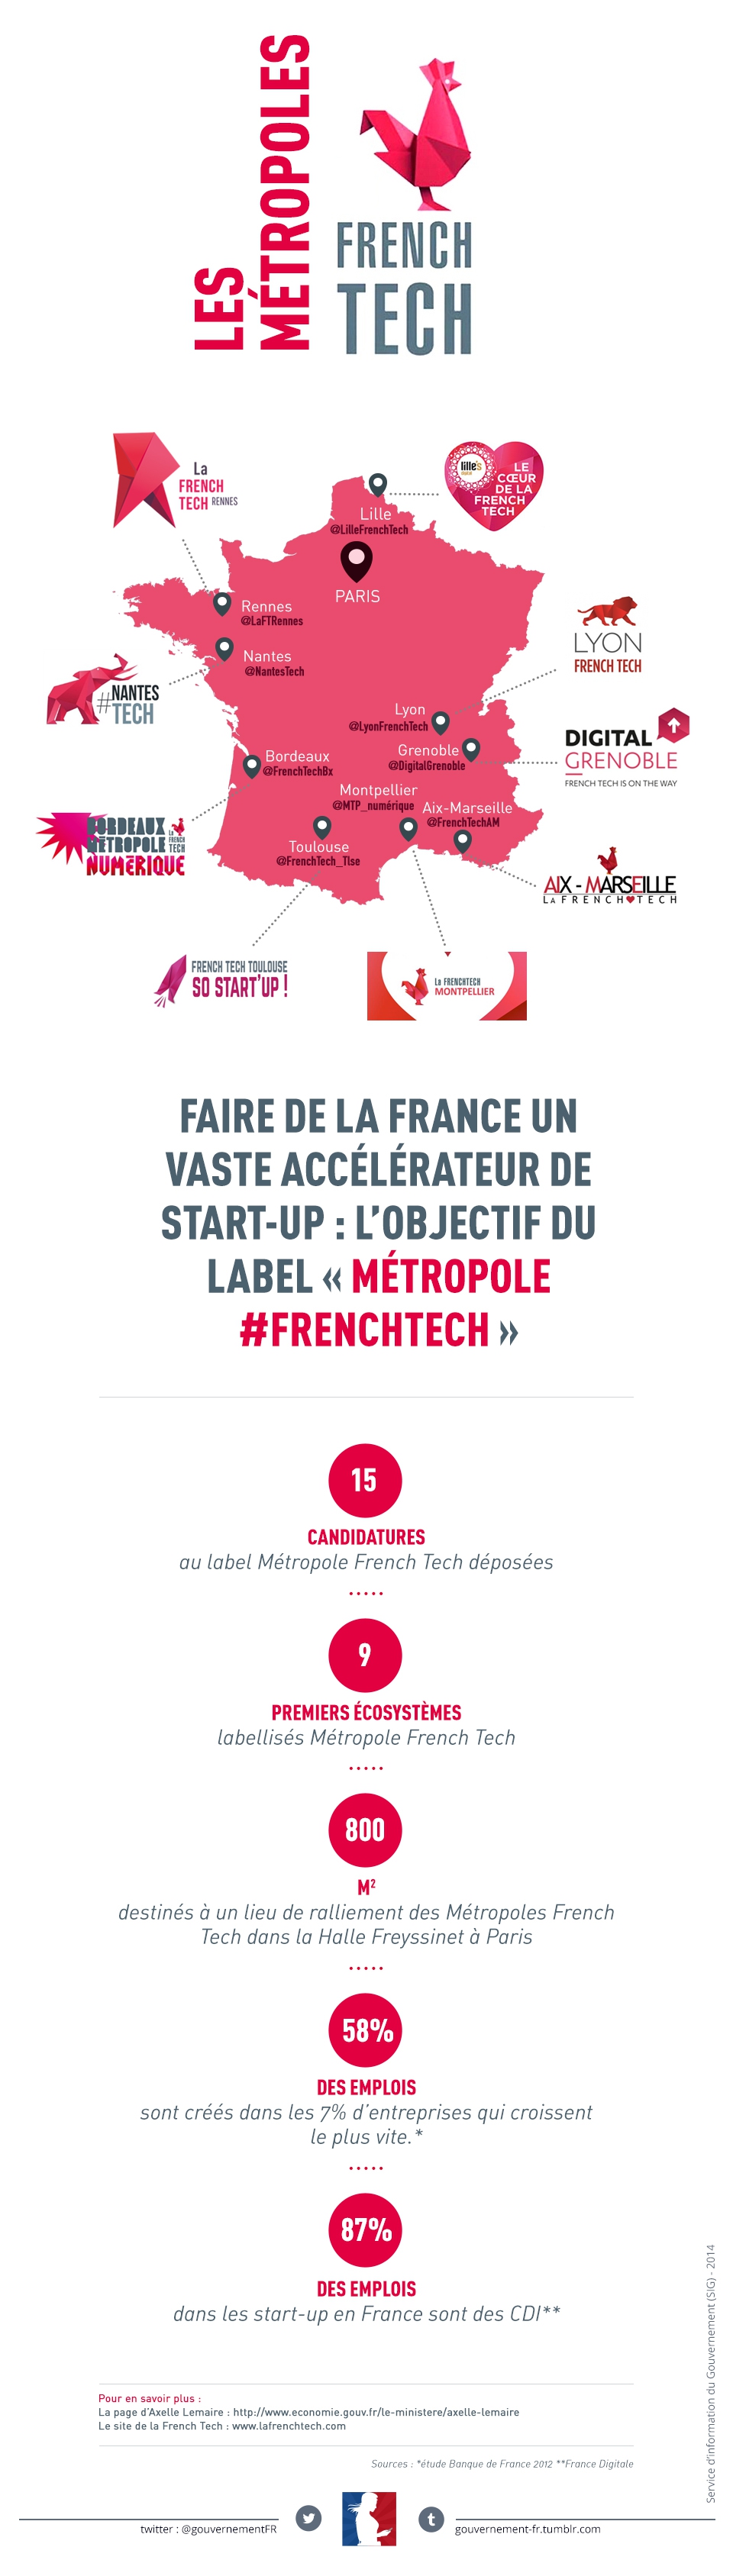 #FrenchTech